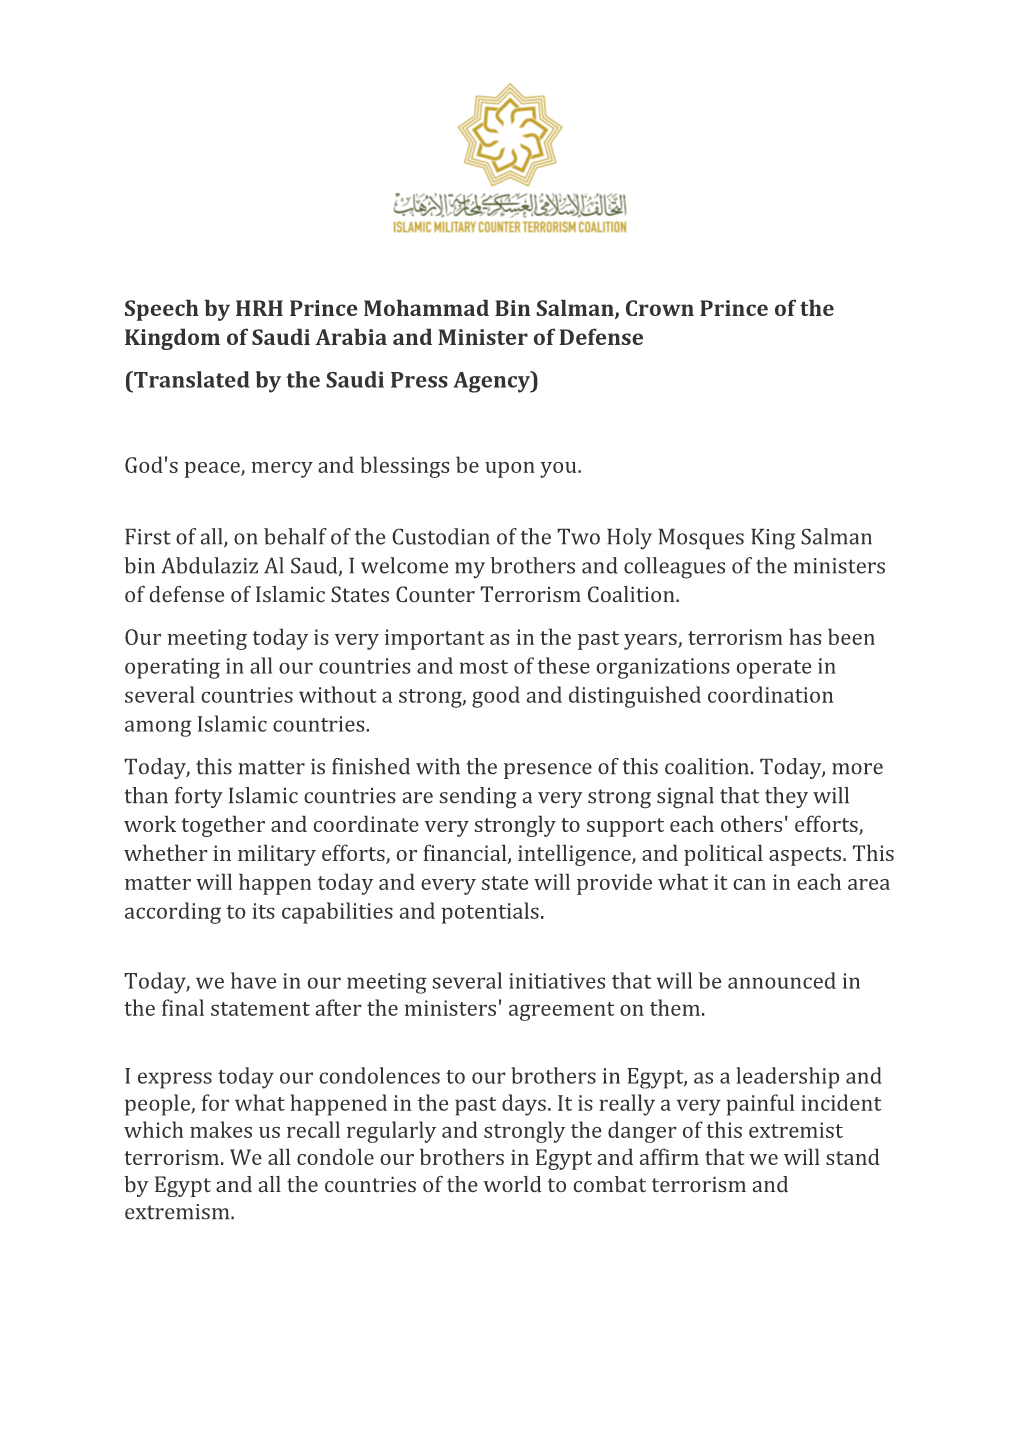 Speech by HRH Prince Mohammad Bin Salman, Crown Prince of the Kingdom of Saudi Arabia and Minister of Defense (Translated by the Saudi Press Agency)